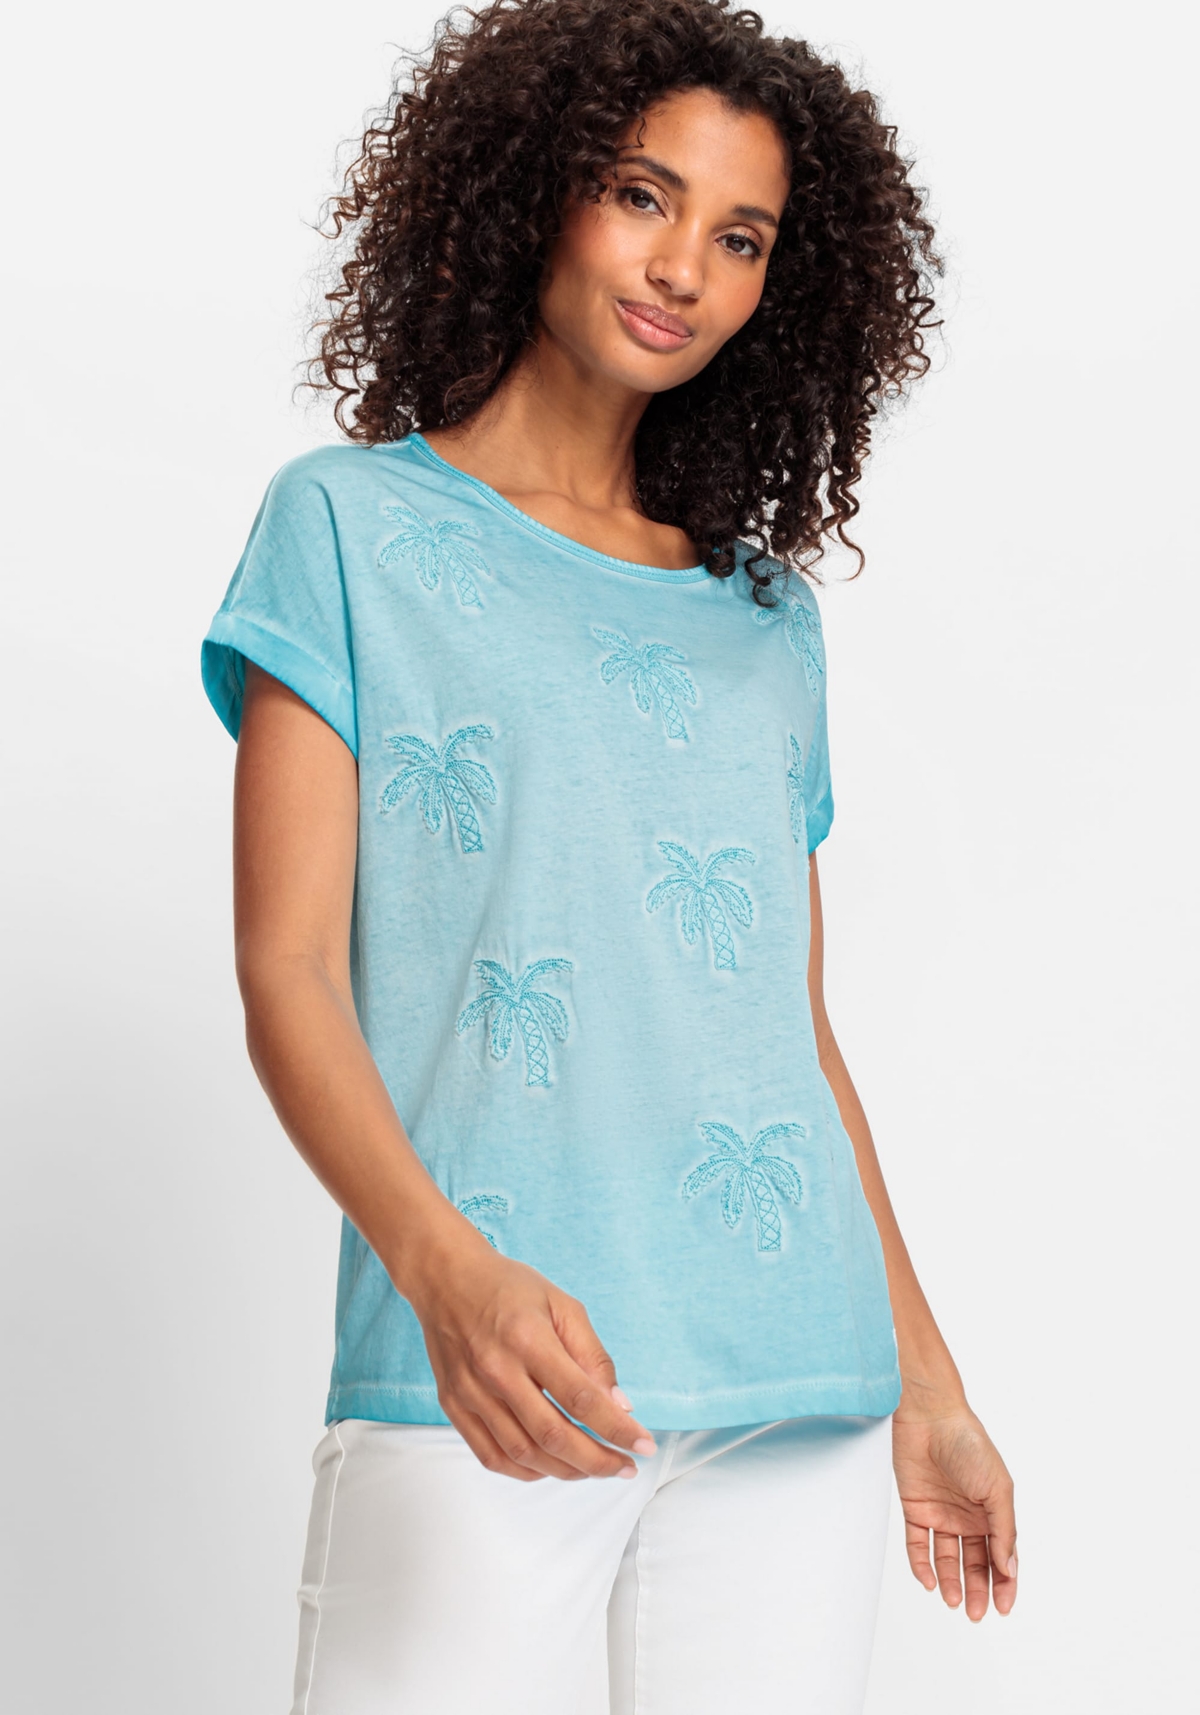 100% Cotton Short Sun-Bleached Tee with Palm Tree Applique - Light turquoise